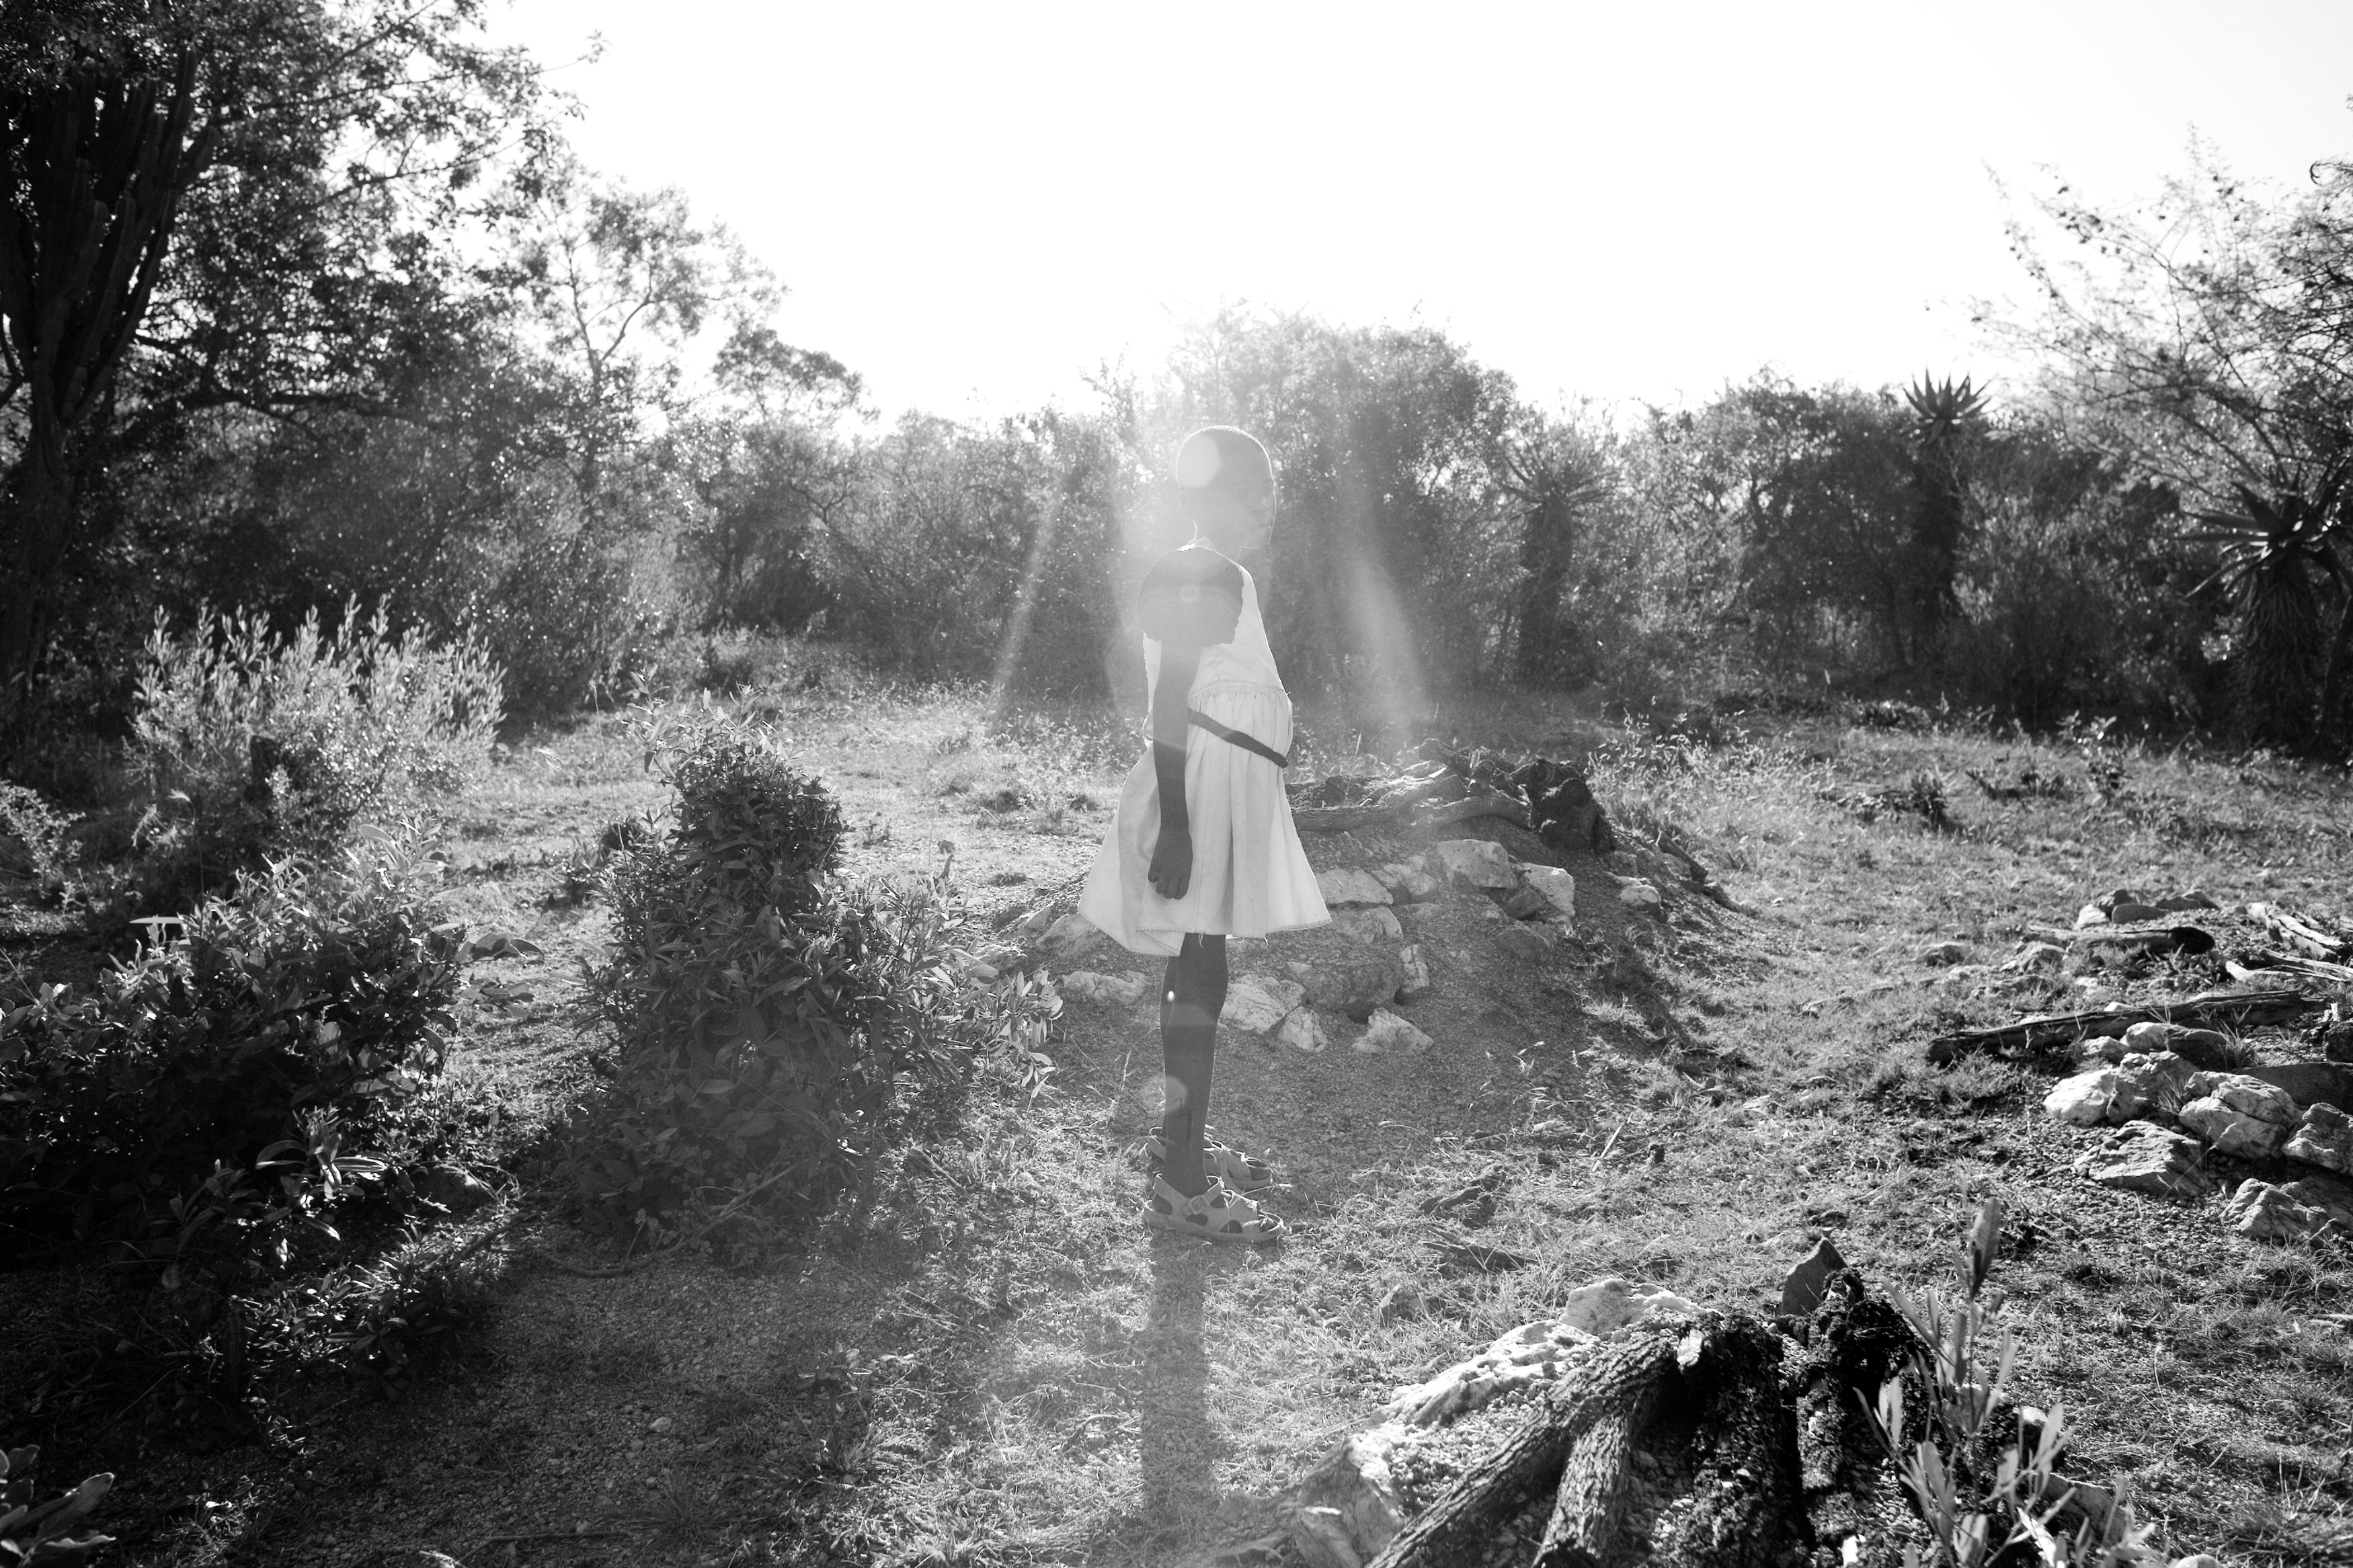 An HIV positive girl, 12, stands near the grave of her father at the family burial ground near their rural home. She has lost both of her parents to AIDS and is now cared for by her HIV positive aunt along with her brother and cousin. She often collects fire wood around the site where many of her extended family are buried.